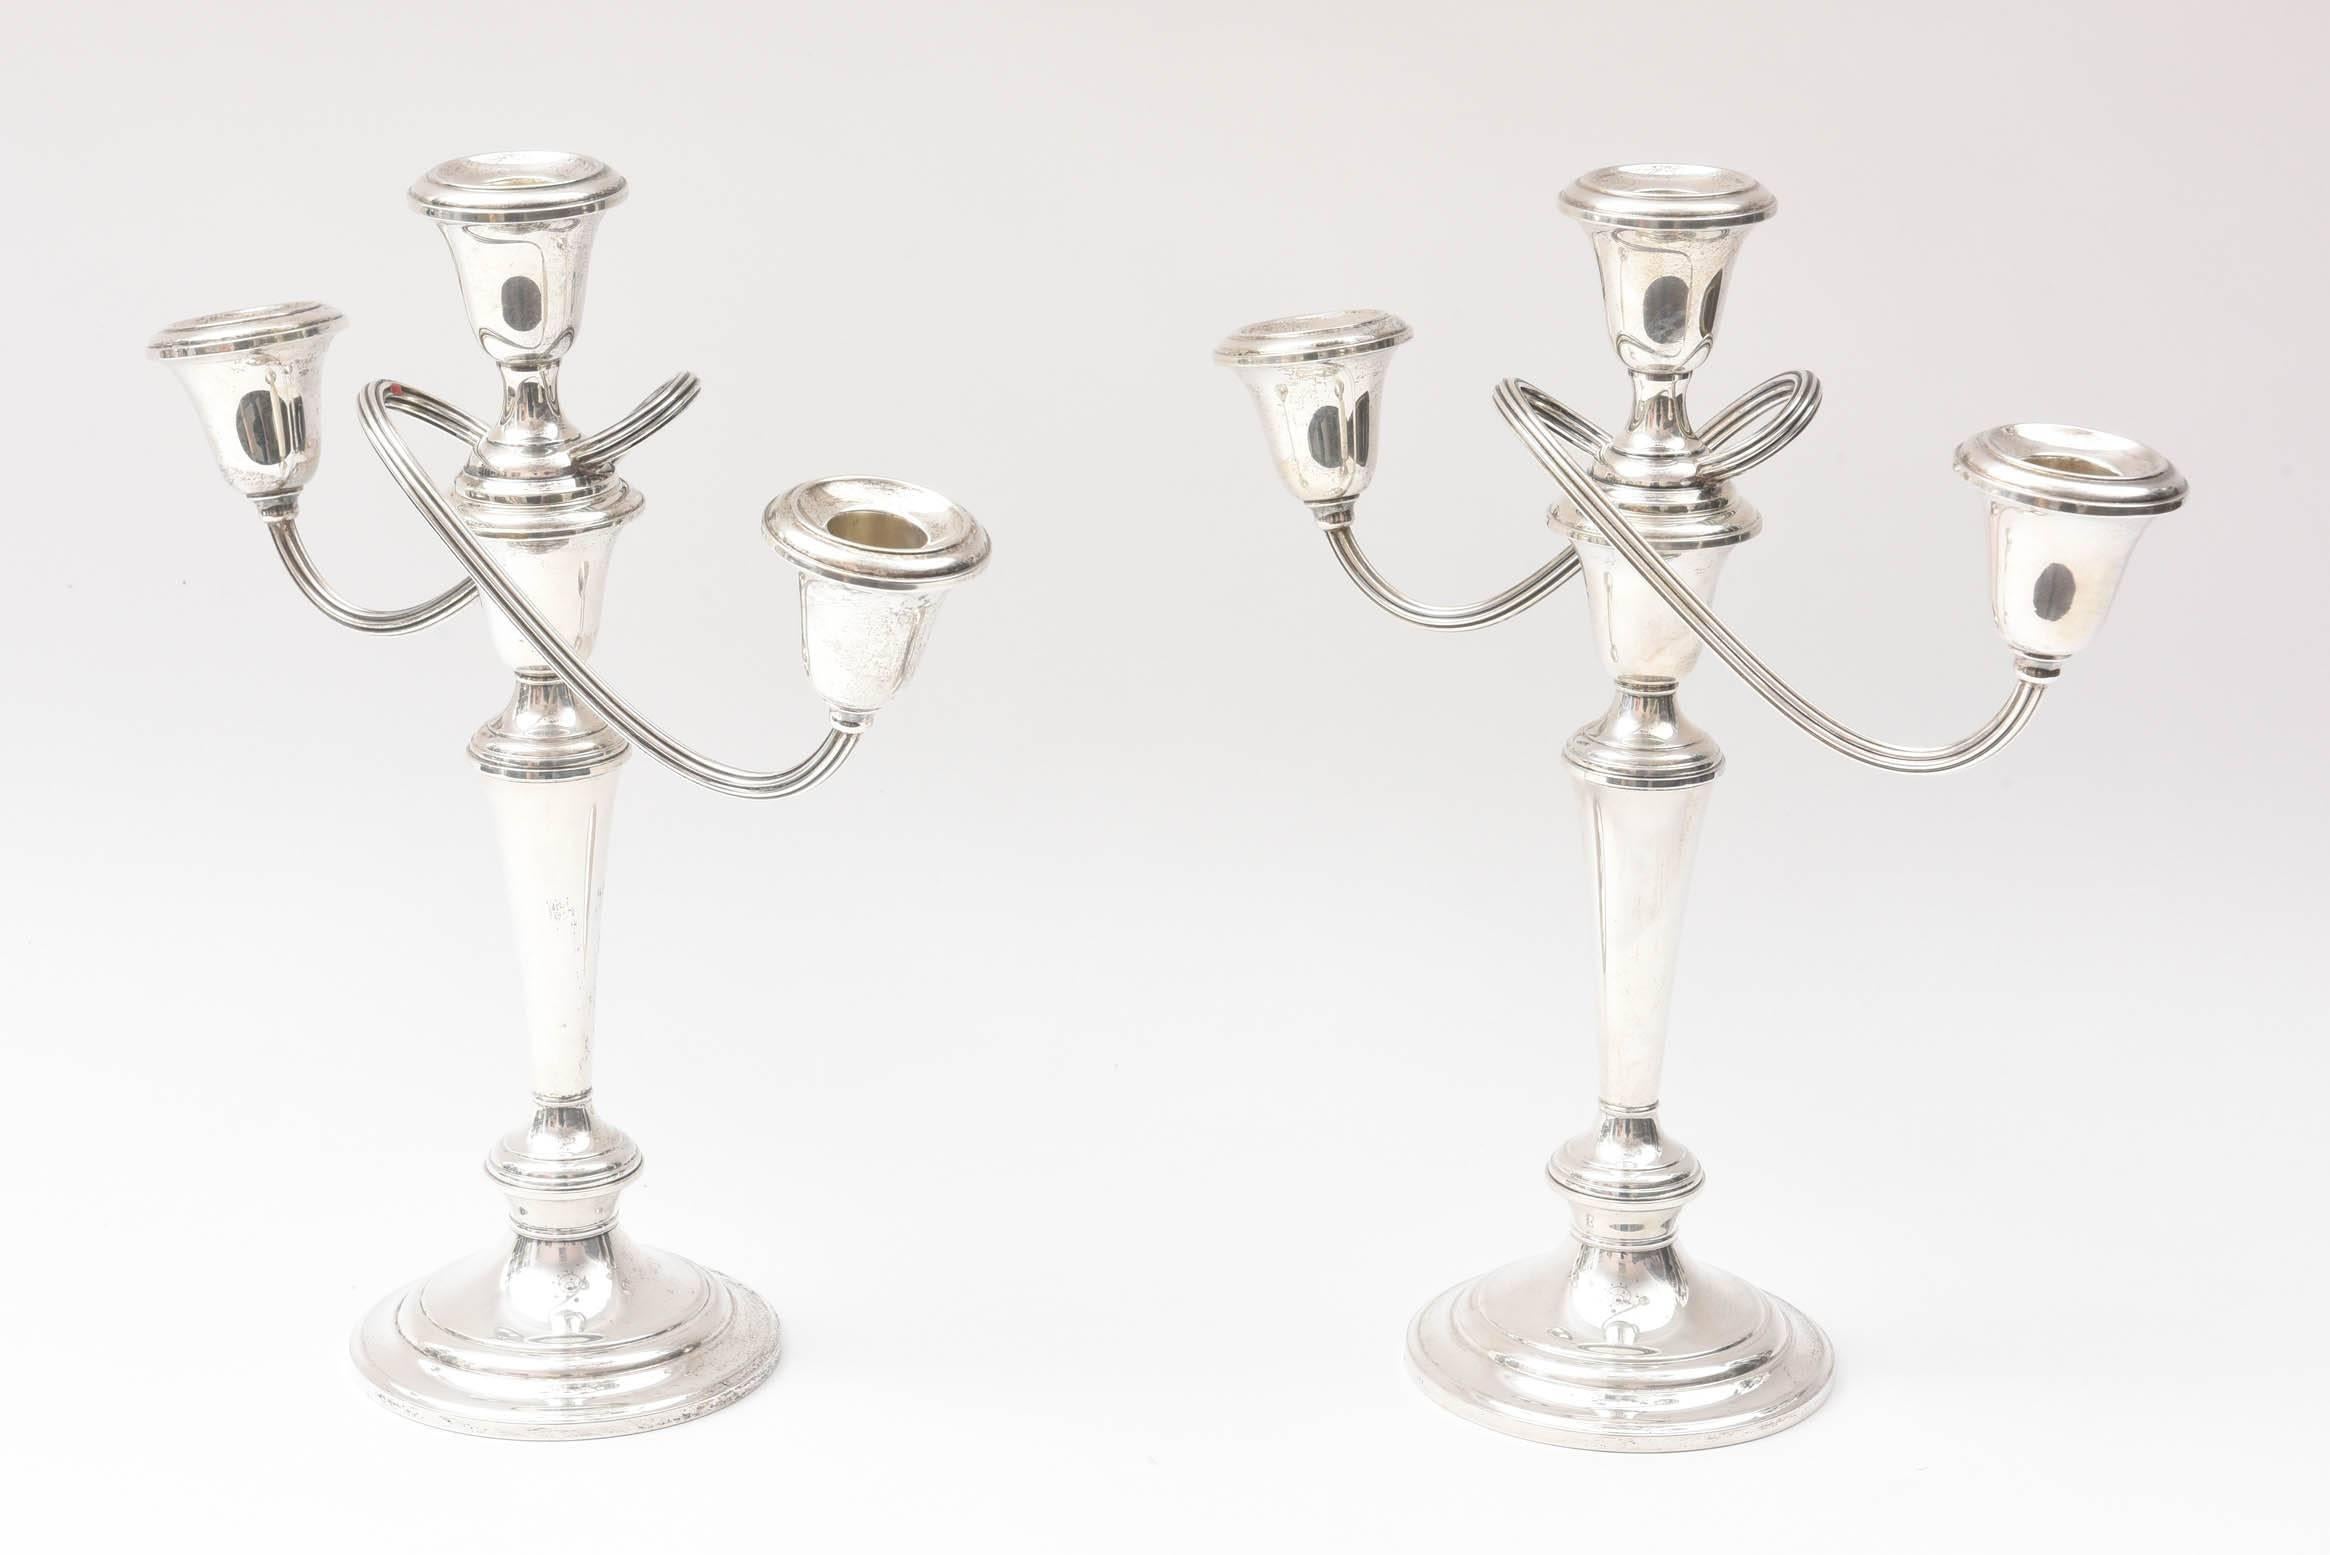 A wonderful pair of vintage candelabra from one of America's storied silversmiths: Gorham. Nicely hand chased details with a delightful twist arm. This pair also converts to a single candlestick. Great vintage condition.
Measure: The single